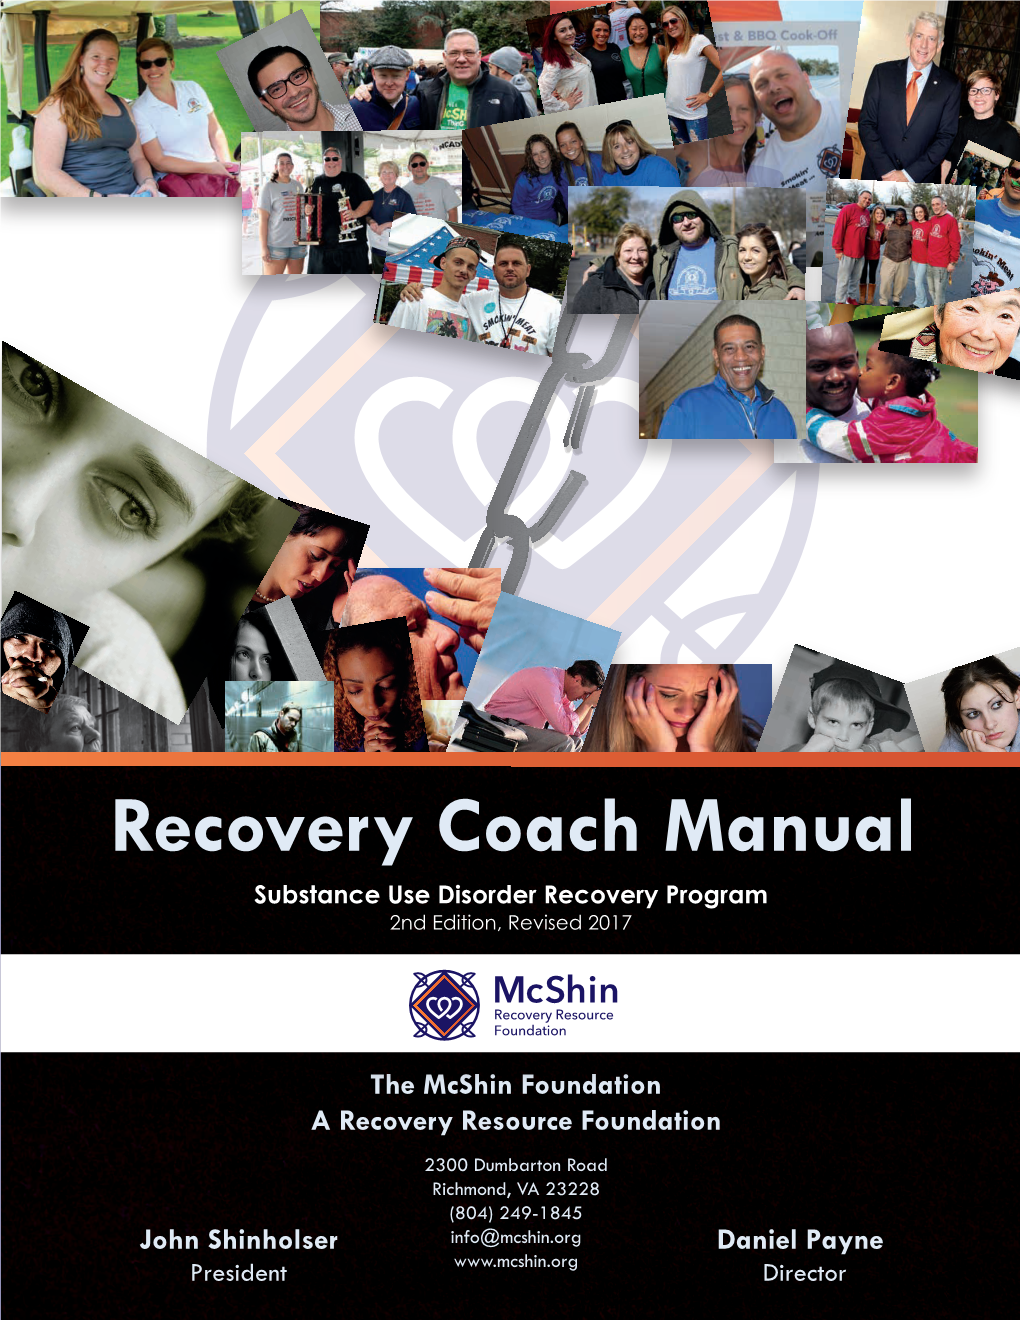 Recovery Coach Manual Substance Use Disorder Recovery Program Recovery2nd Edition, Coach Revised 2017 Manual